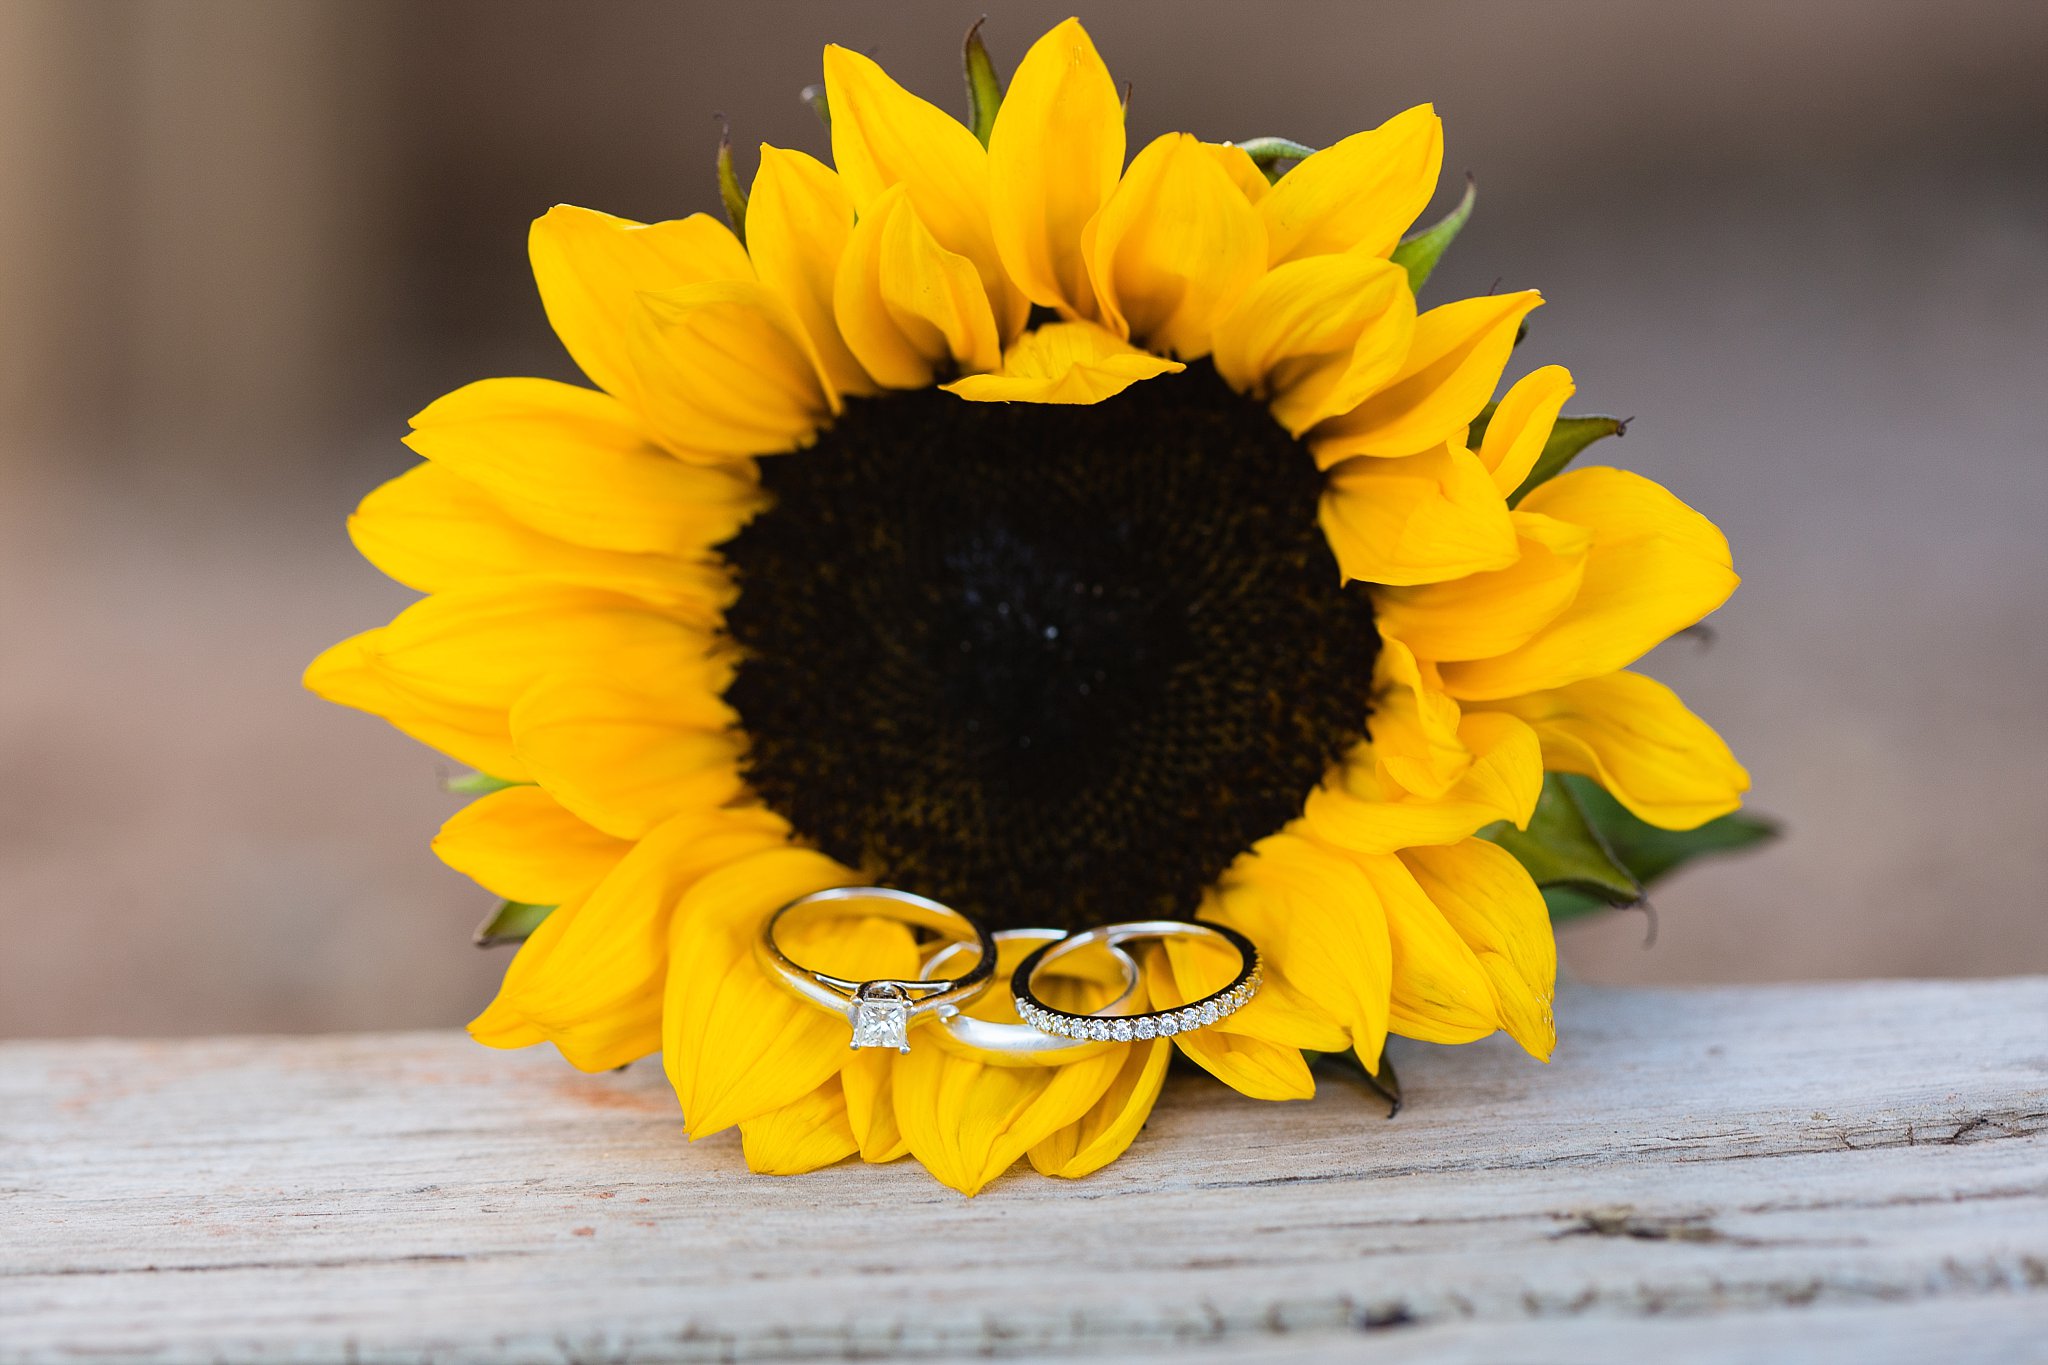 White gold simple wedding rings on a yellow sunflower by Sedona wedding photographer PMA Photography.